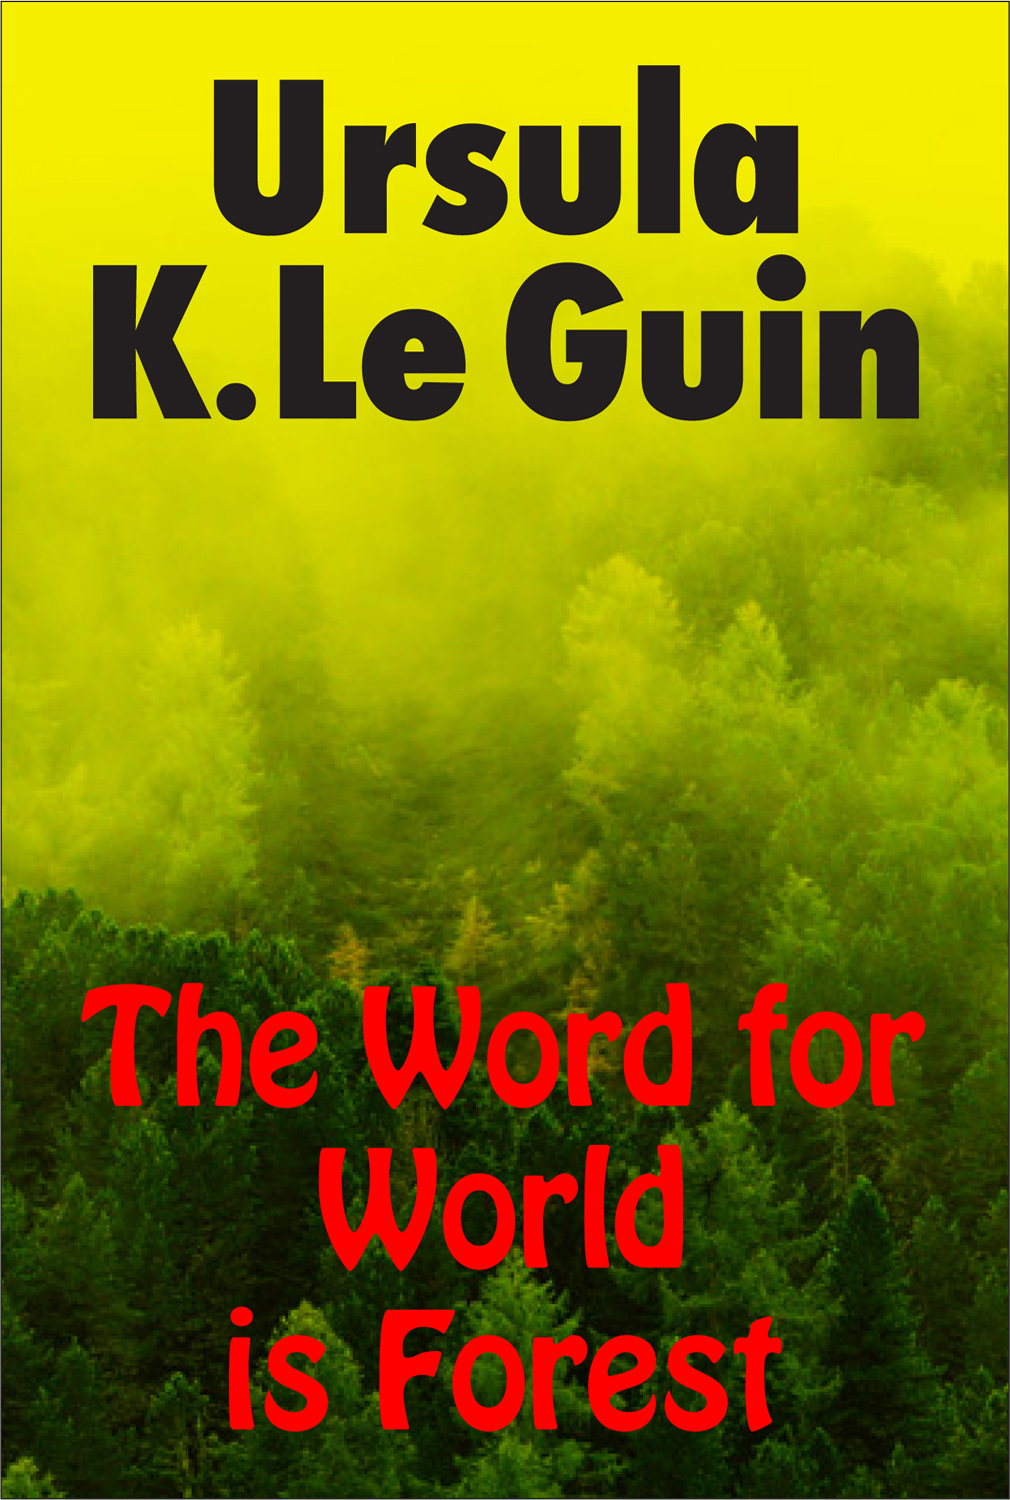 The Word for World is Forest, 1976, Ursula Le Guin